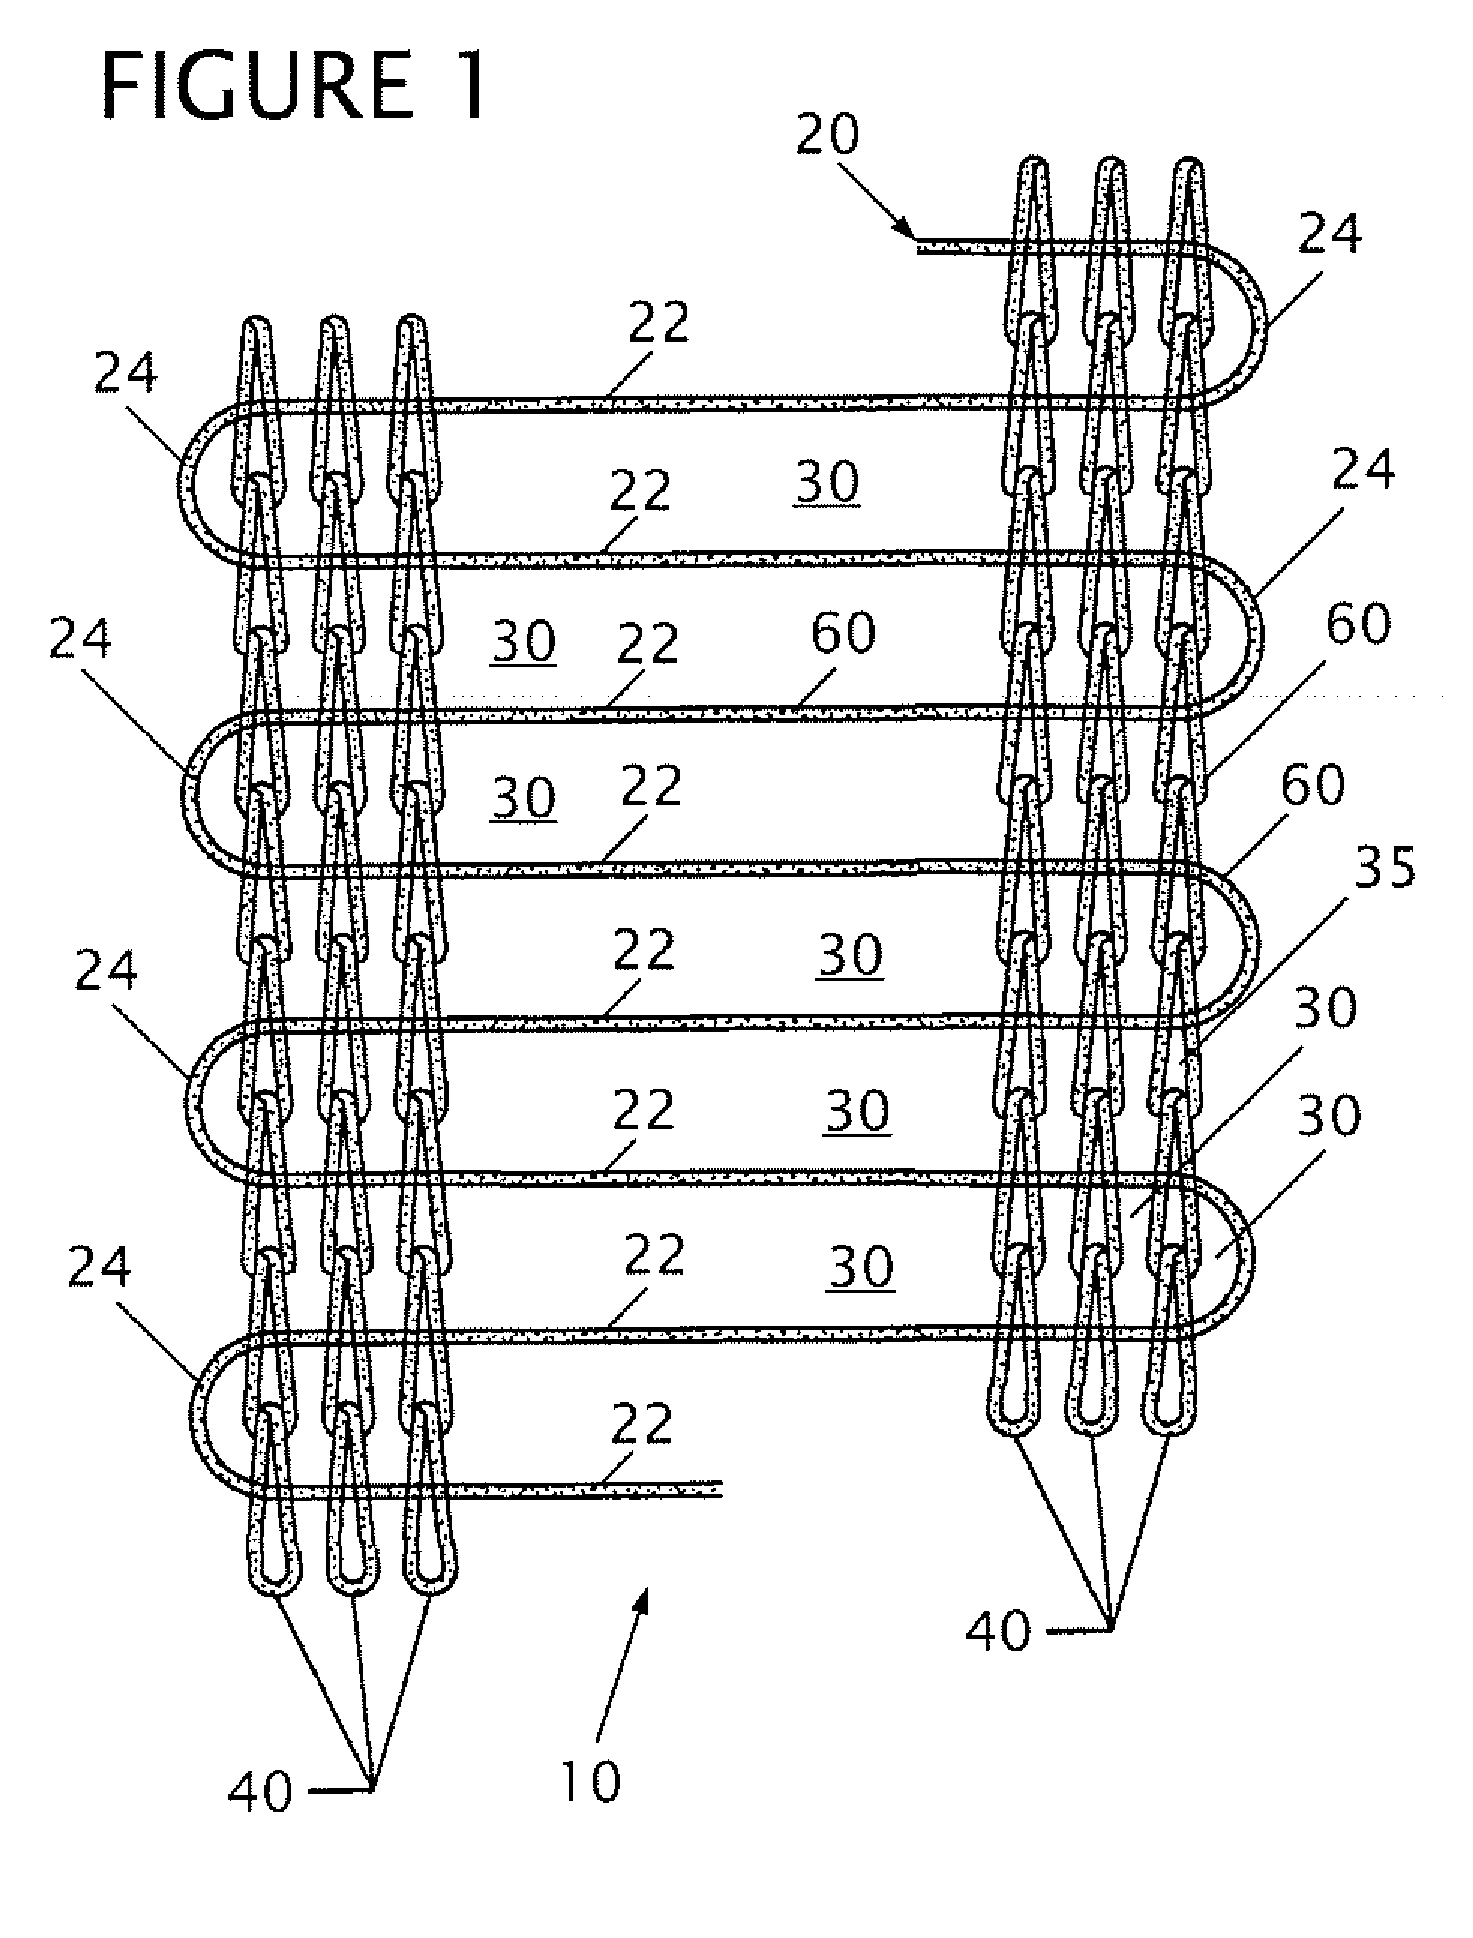 Carrier Assembly with Fused Powder and Frame-Warp Aperture